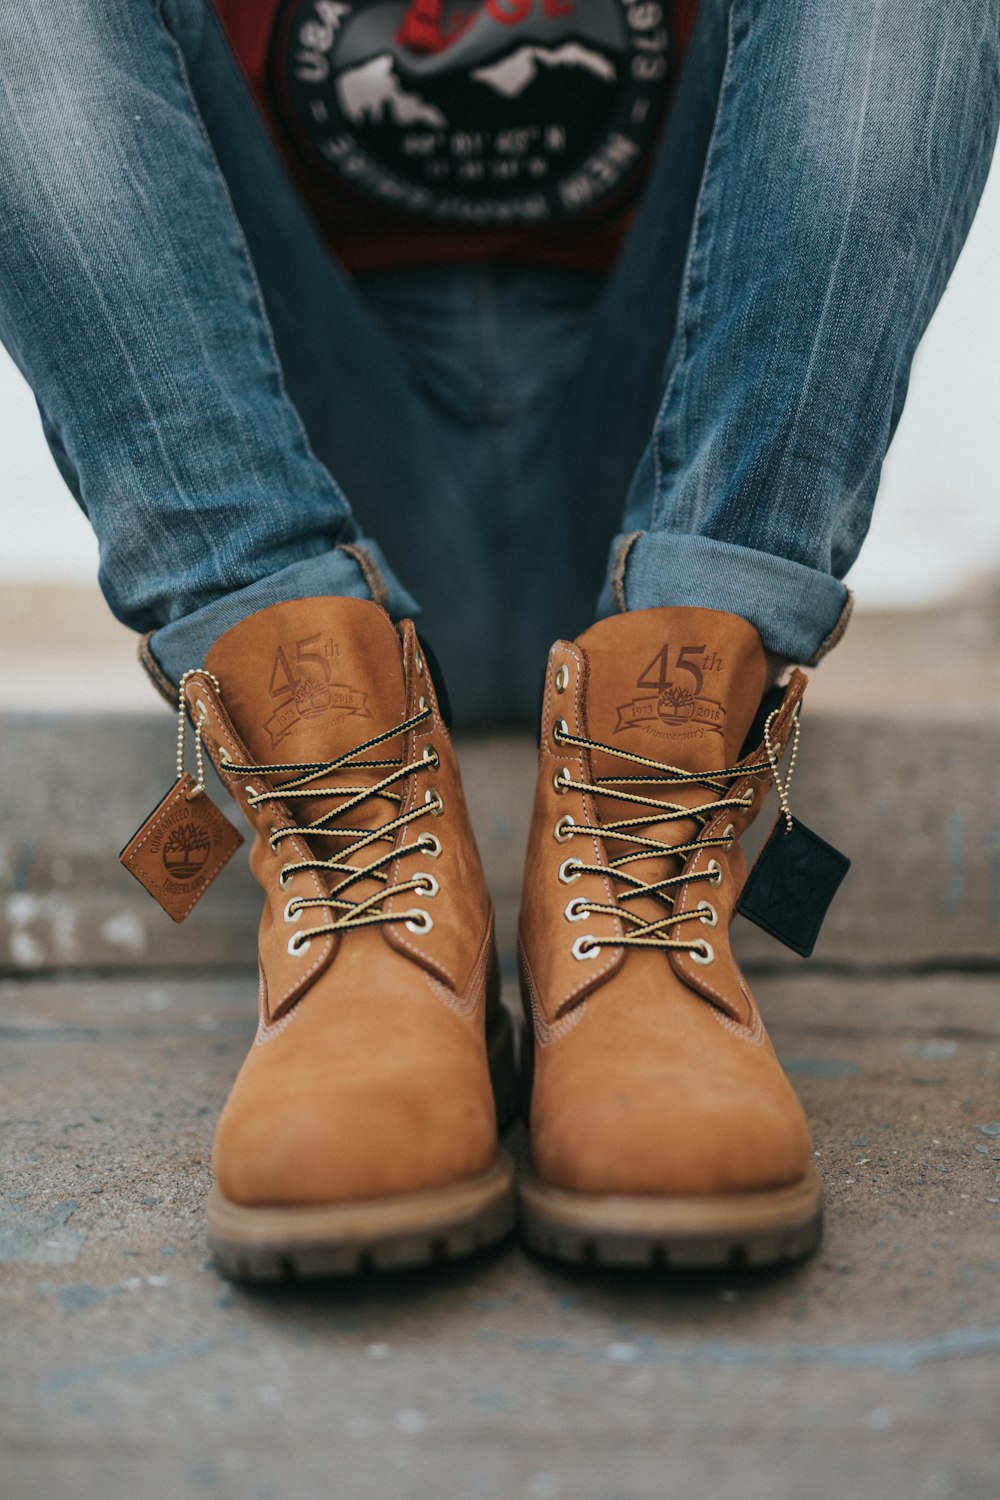 A pair of brown Timberland boots photo – Free Style Image on Unsplash